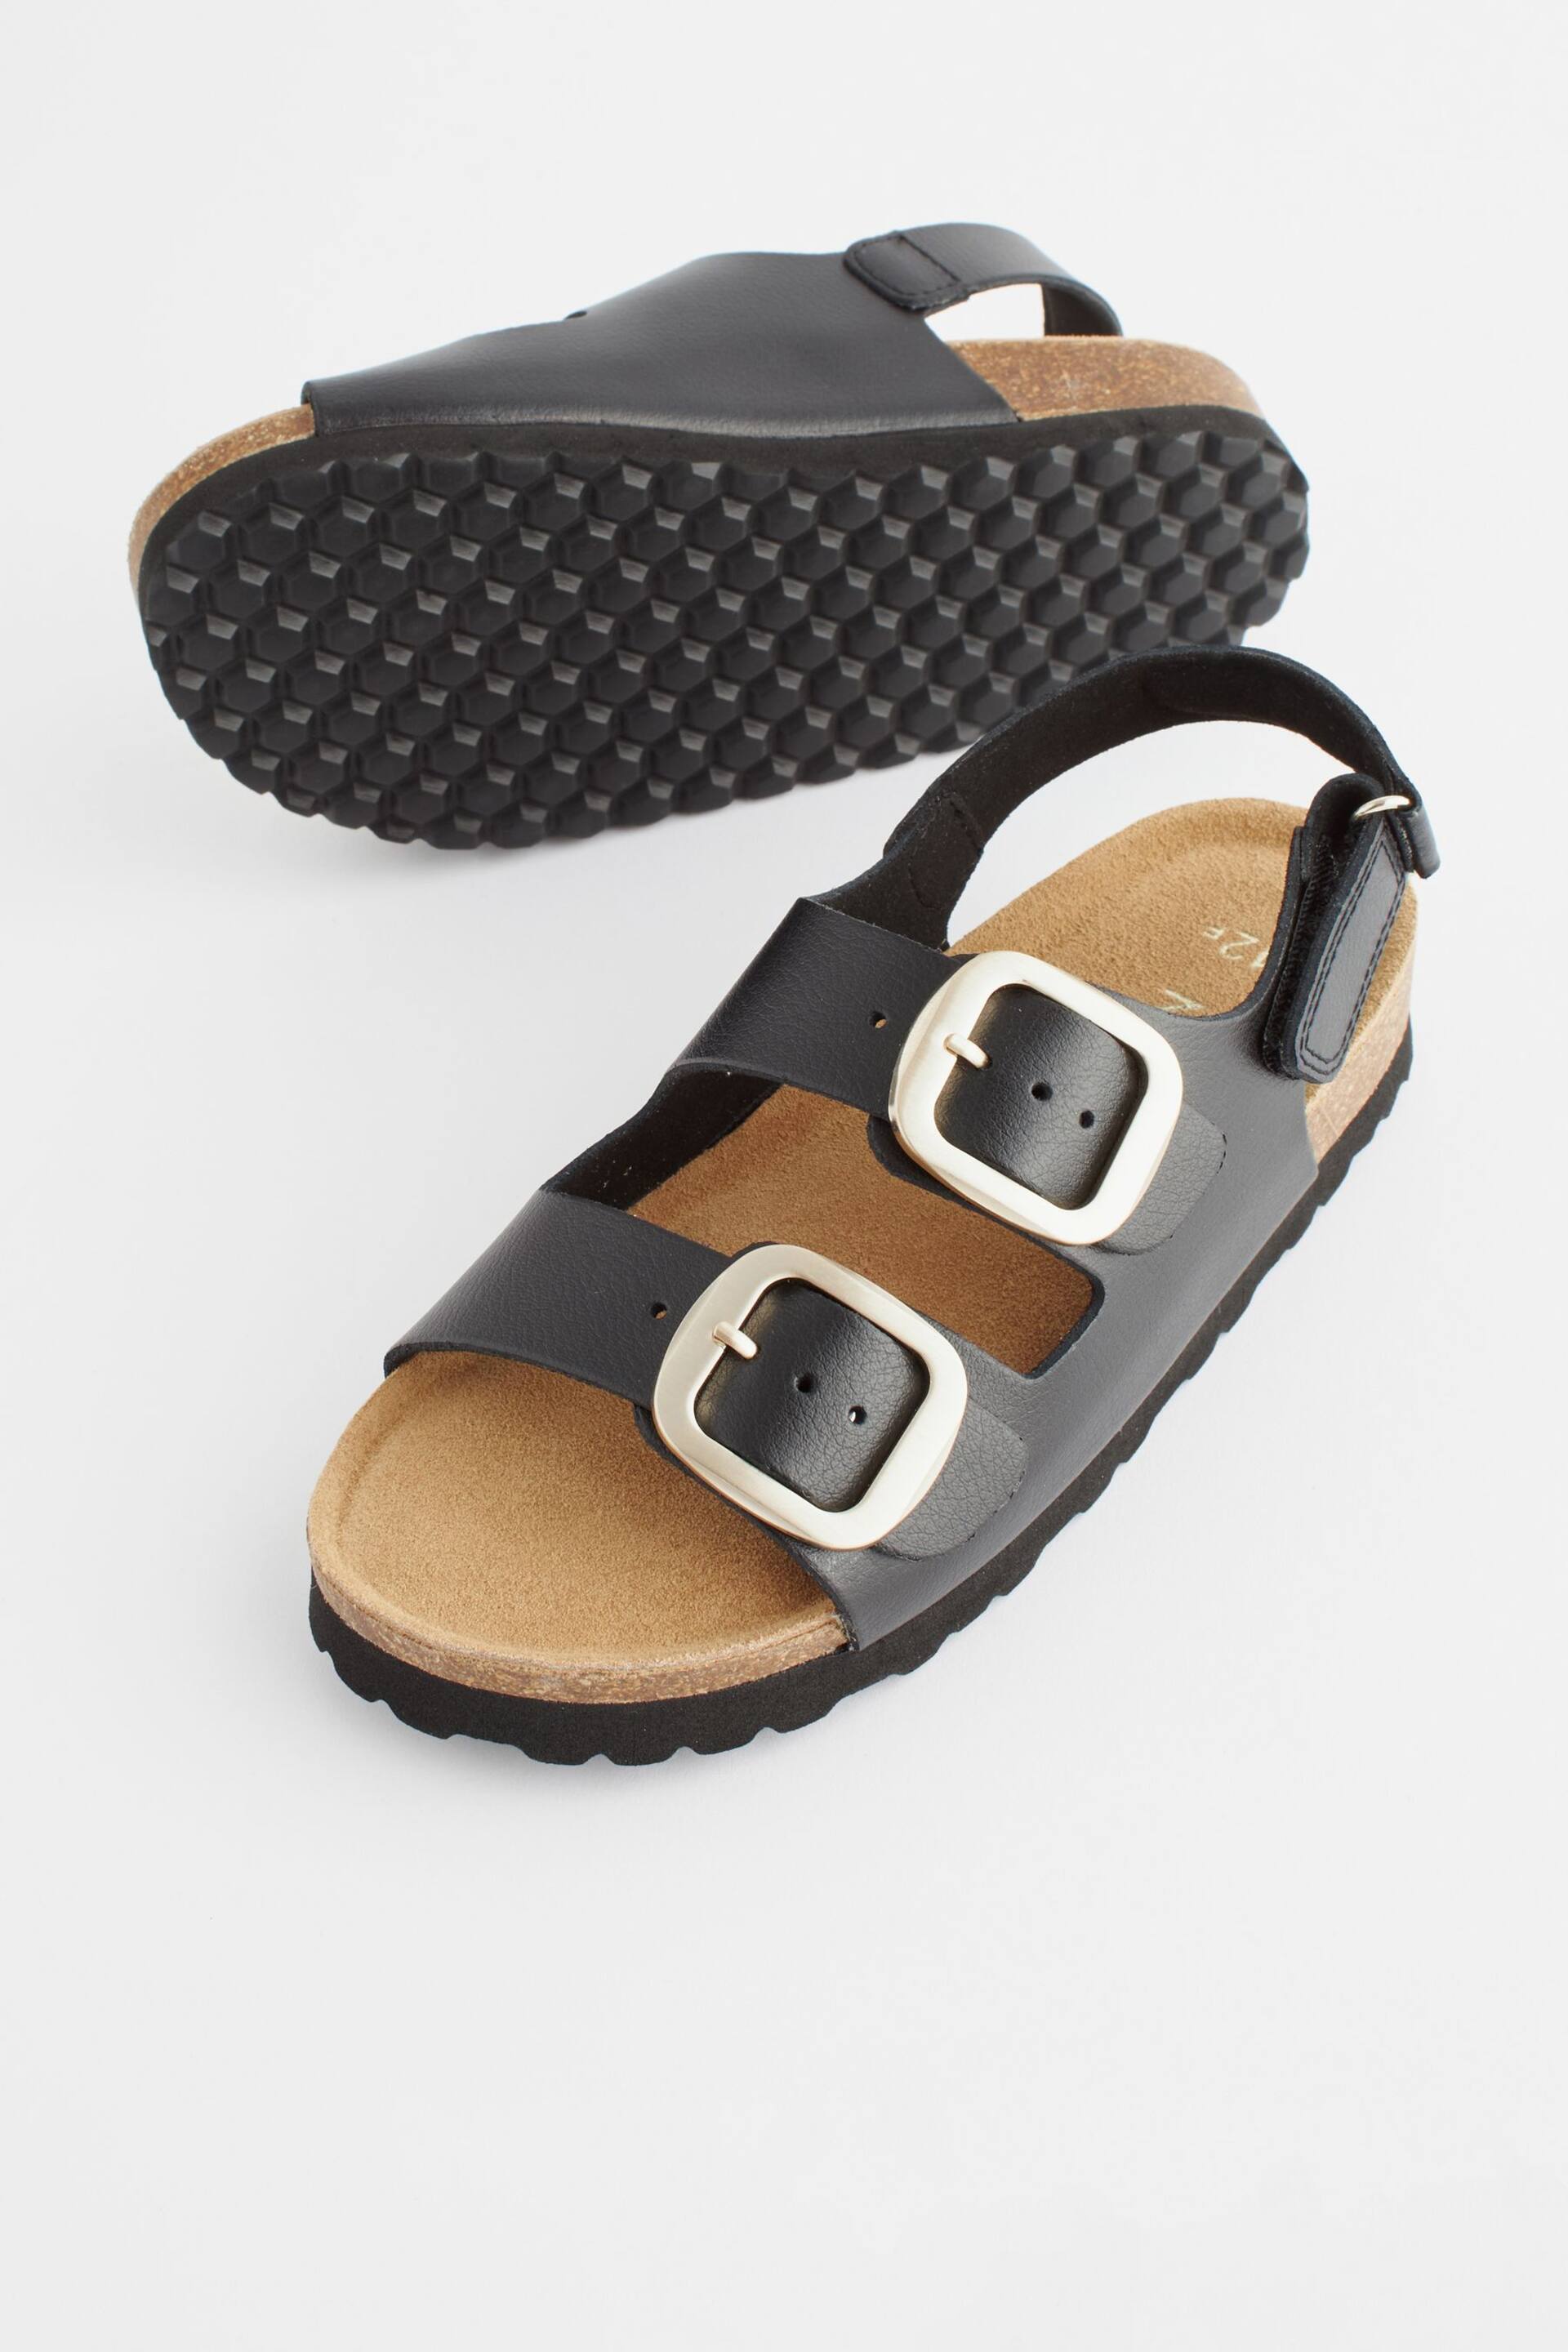 Black Leather Wide Fit (G) Two Strap Corkbed Sandals - Image 4 of 8